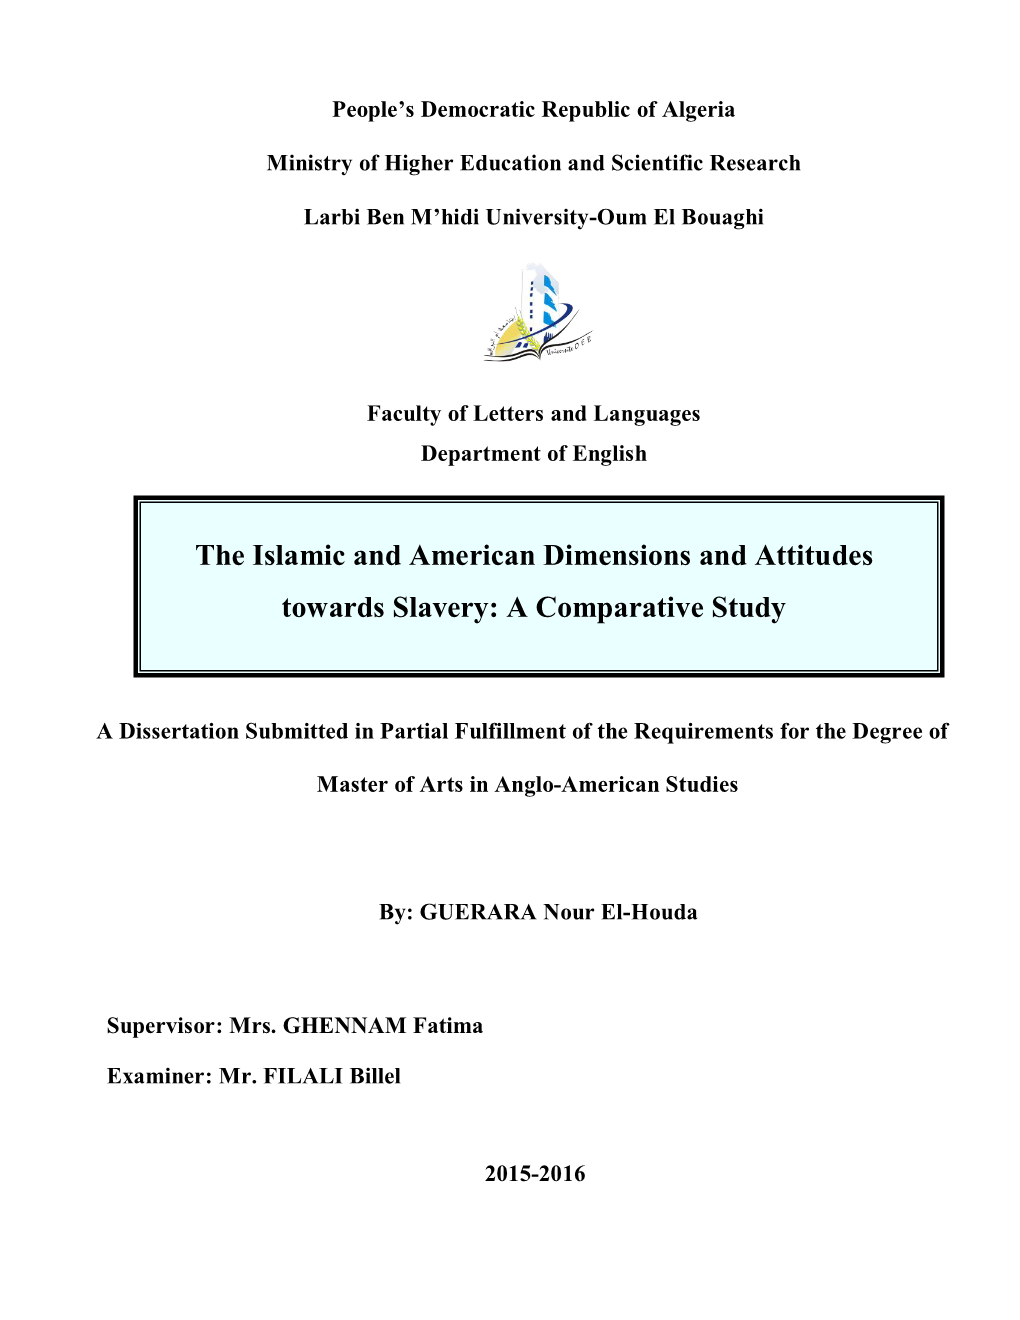 The Islamic and American Dimensions and Attitudes Towards Slavery: a Comparative Study